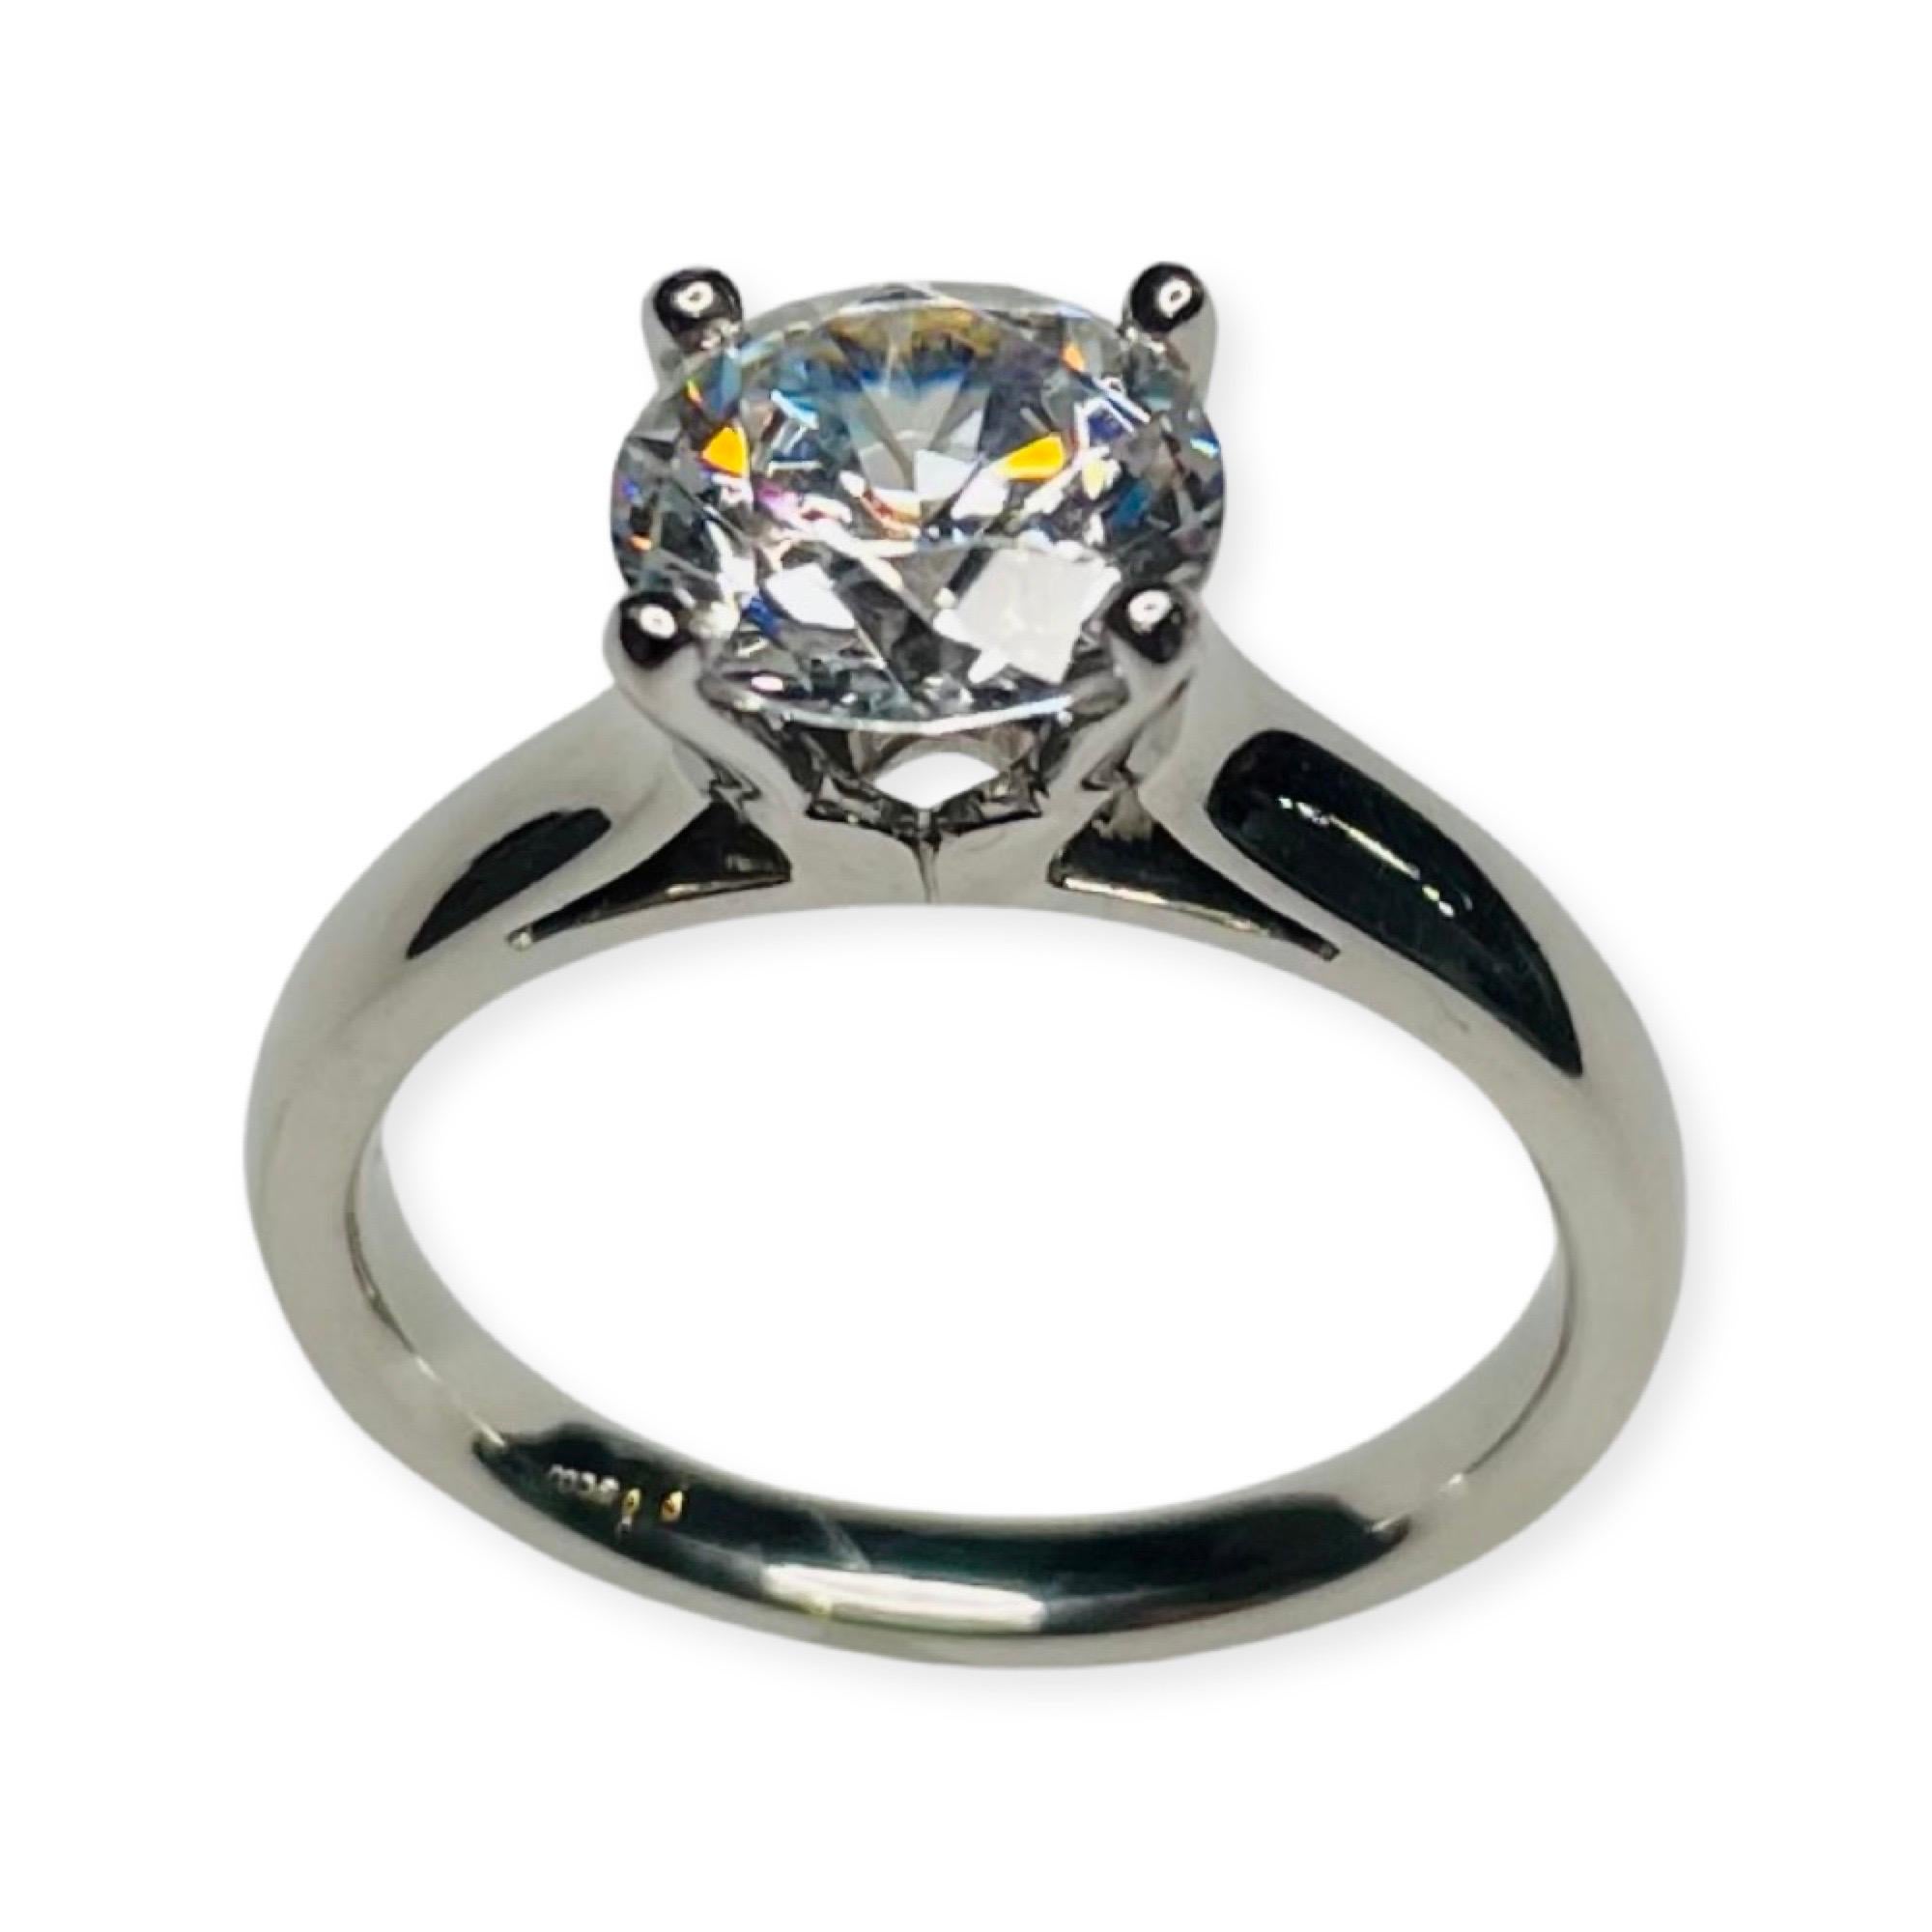 Judith Conway Platinum Engagement Ring with an 8.0 mm Cubic Zirconia Center. This CZ is equivalent to a 2.0 carat diamonds.  The ring is 3.3 mm at the top and tapers to 2.3 mm at the base of the shank. It is finger size 6.75 but can be sized for an